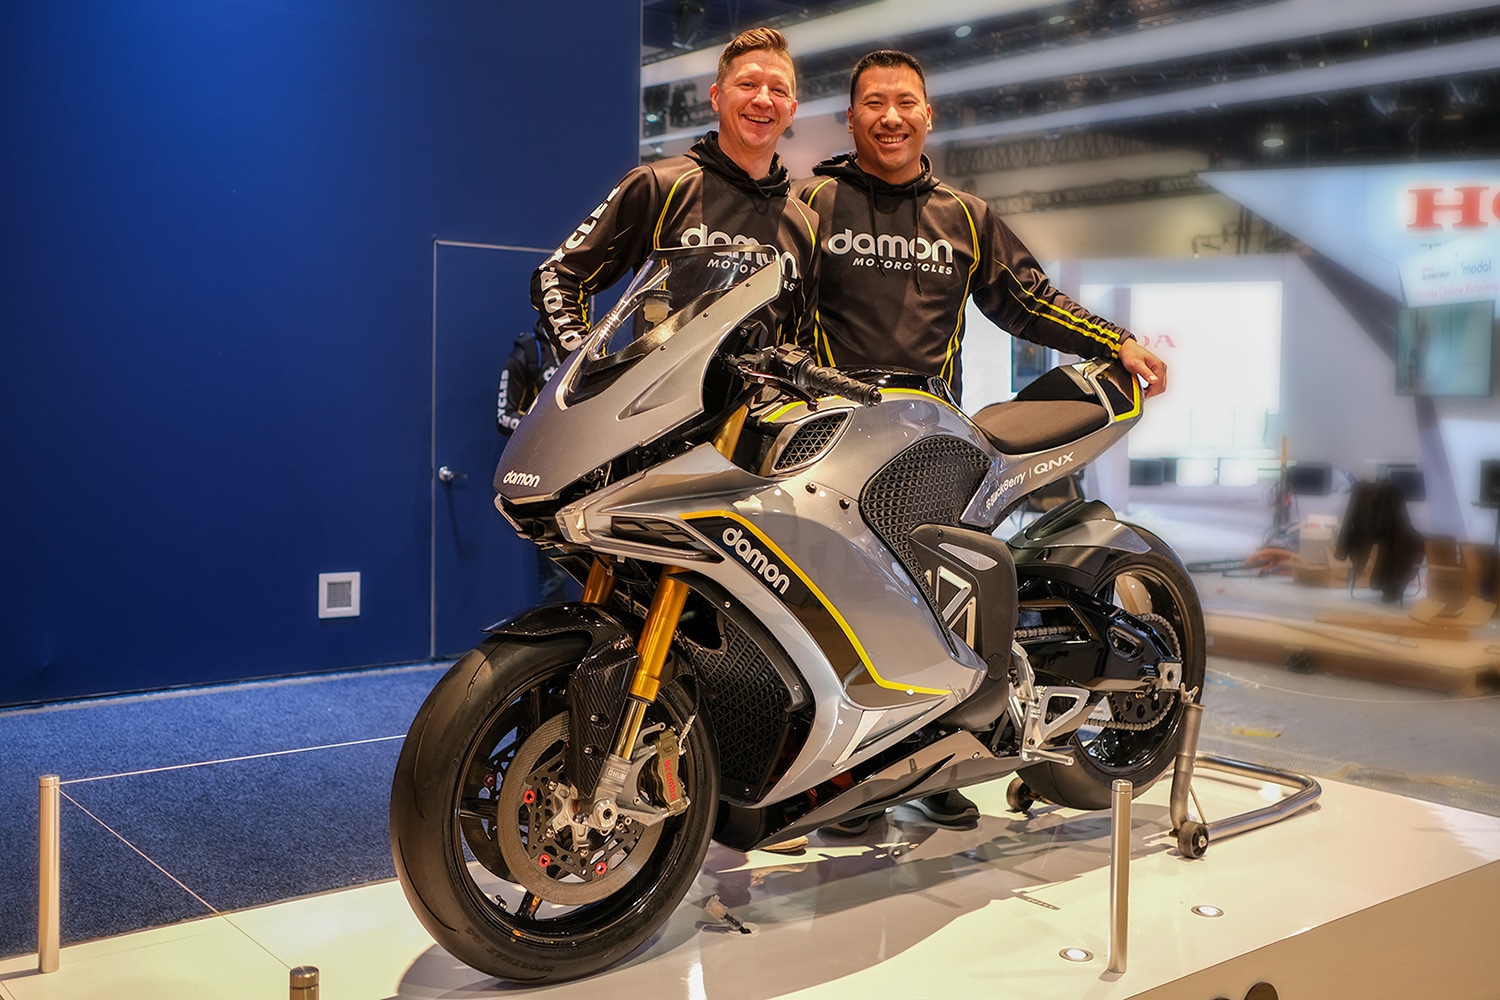 The Damon Motorcycles officially presented the Hypersport HS at CES in Las Vegas.